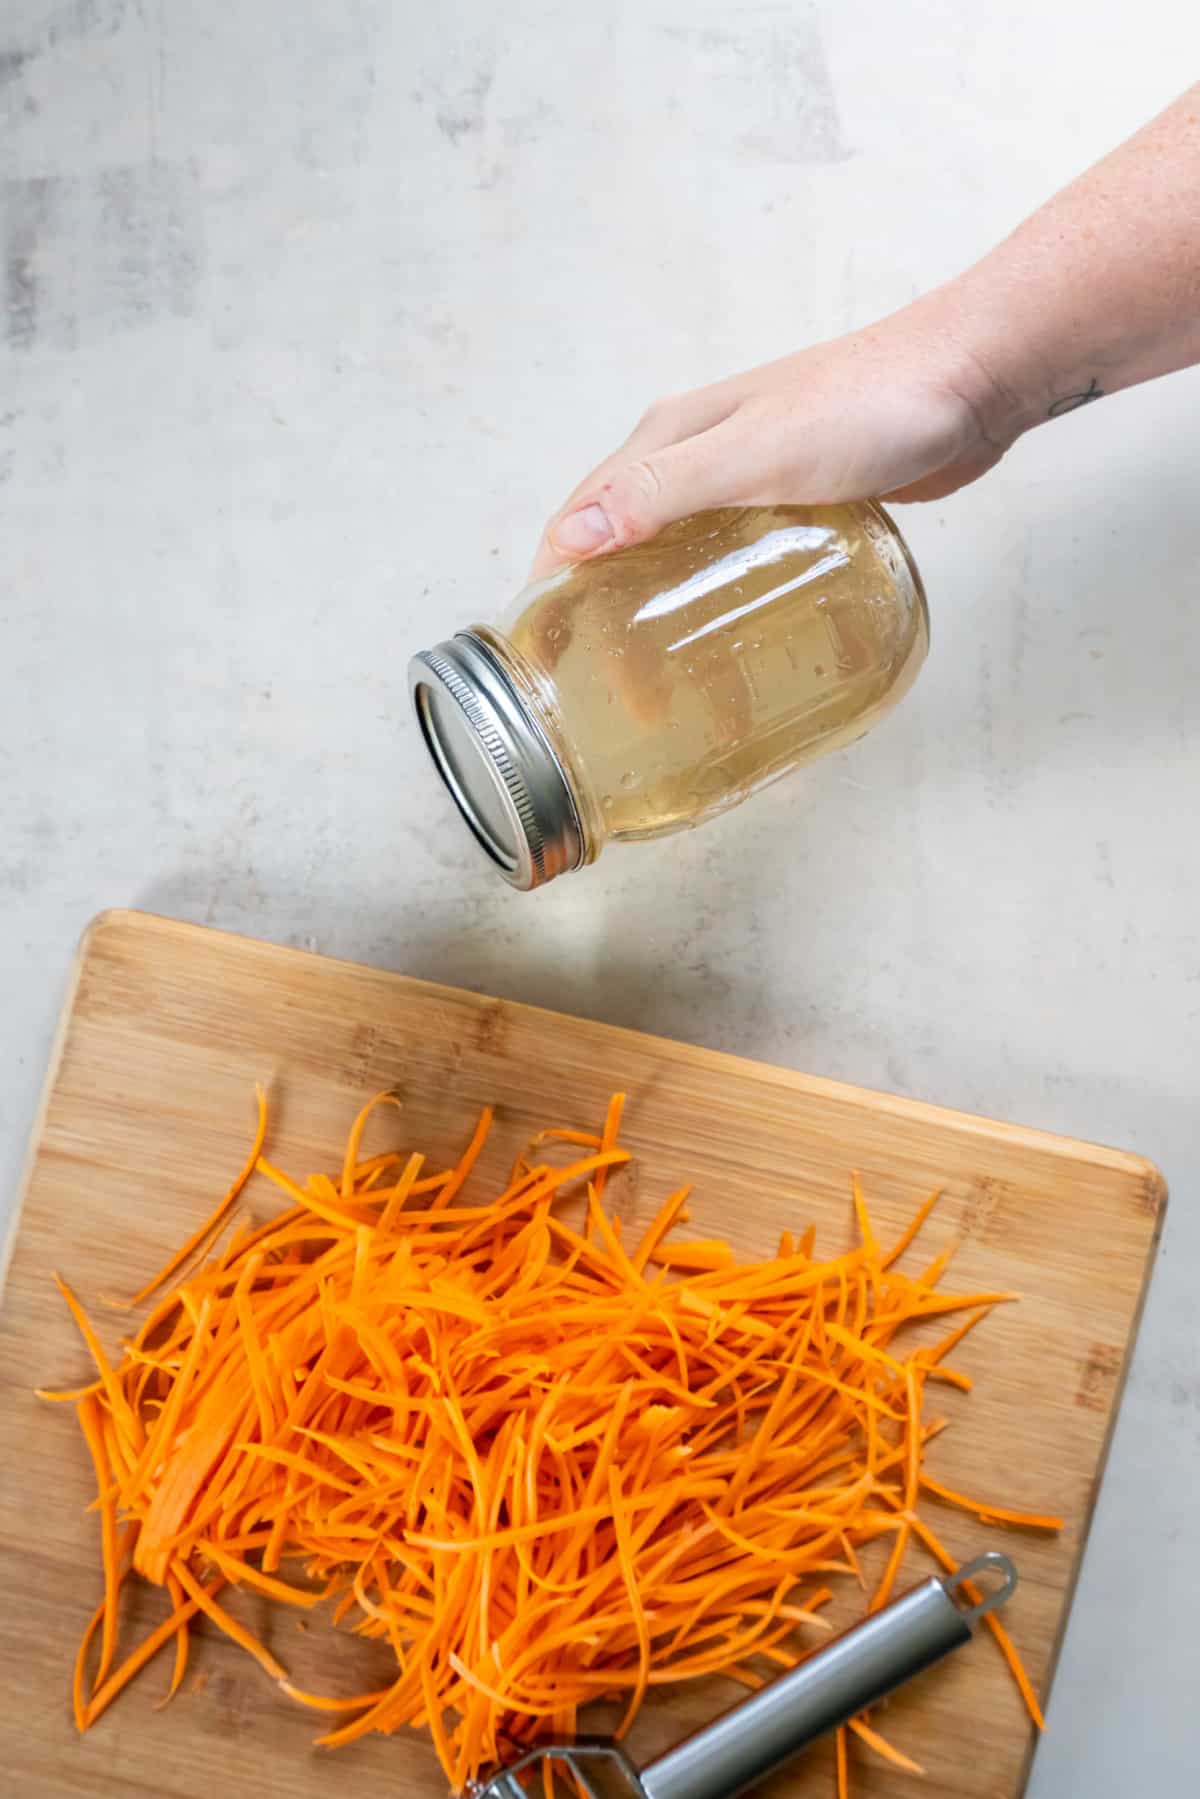 The brine for the pickled carrots in a glass jar with the shredded carrots on a wooden cutting board.